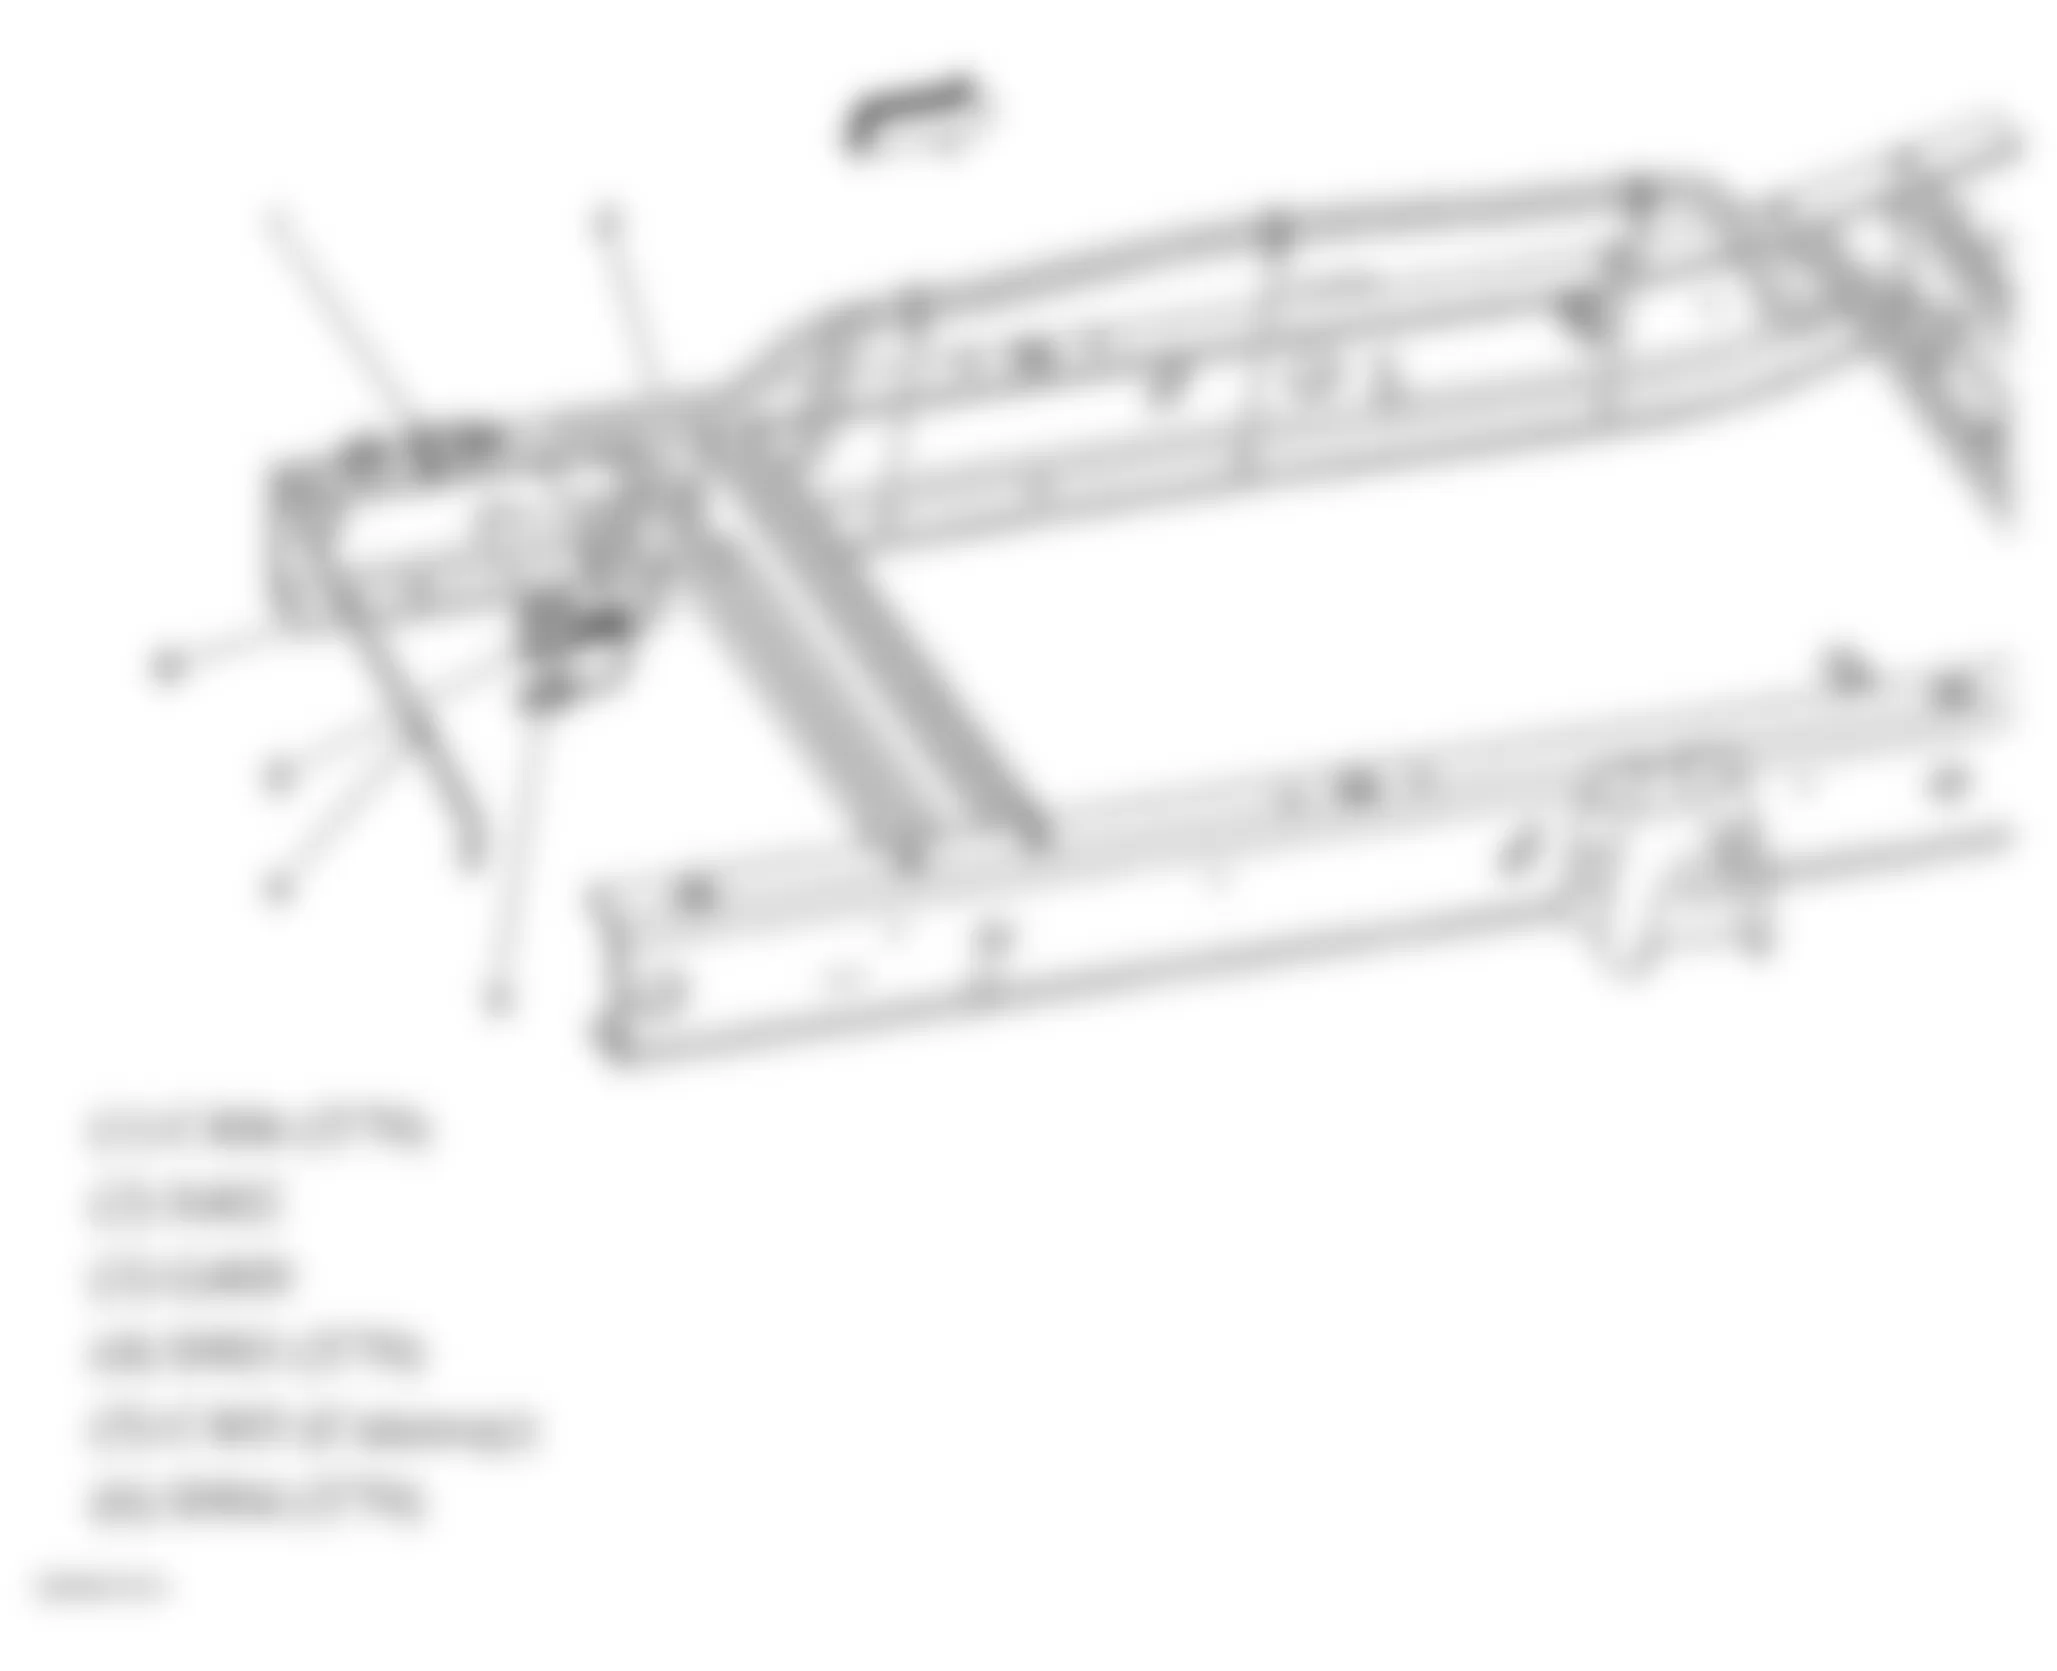 GMC Savana Special G3500 2007 - Component Locations -  Rear Chassis (Cutaway)